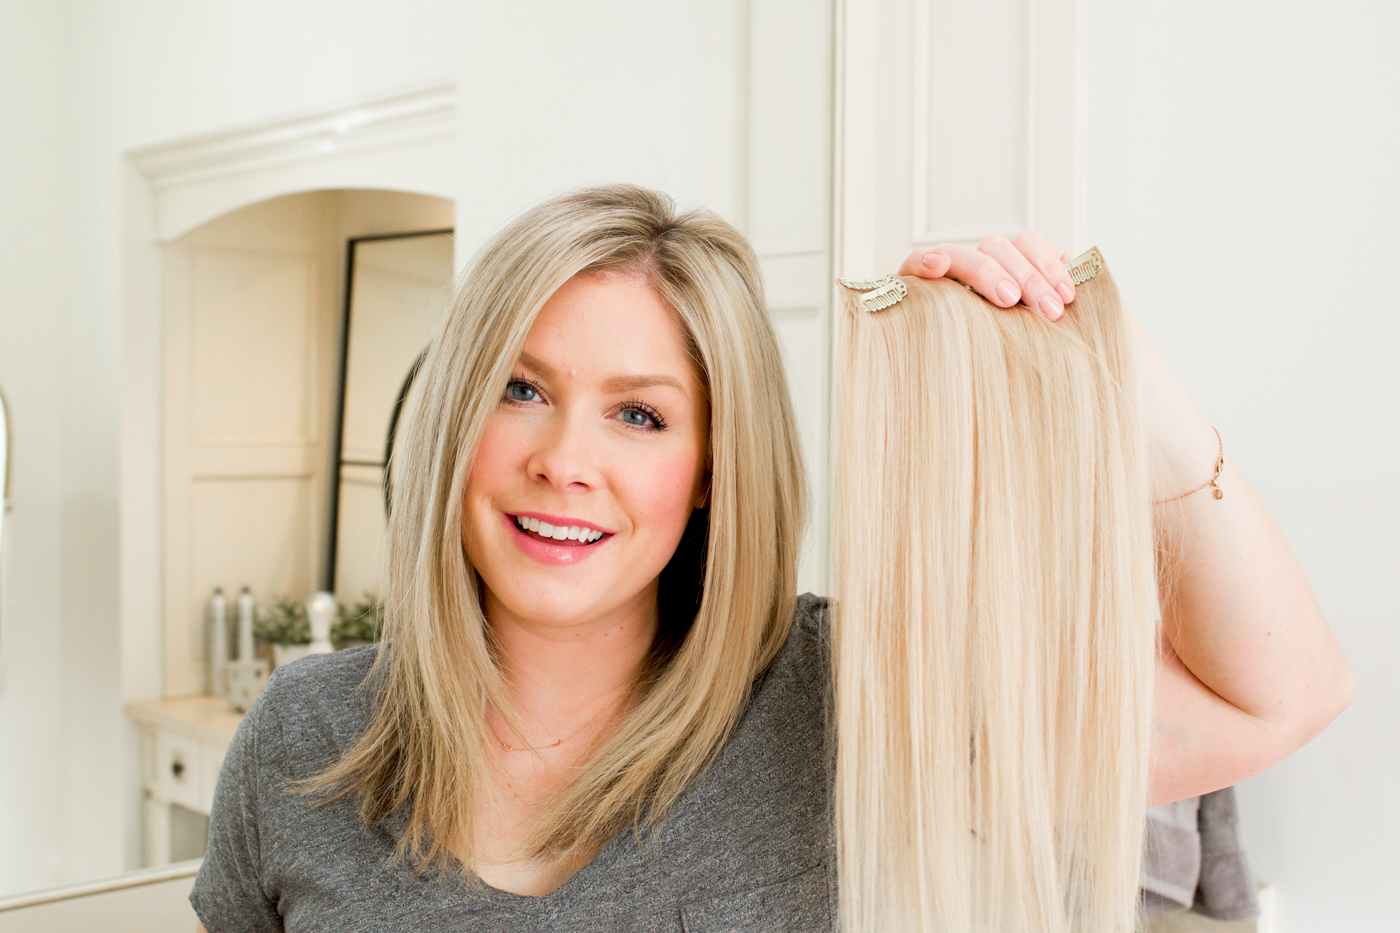 How To Choose, Blend, and Wear Hair Extensions